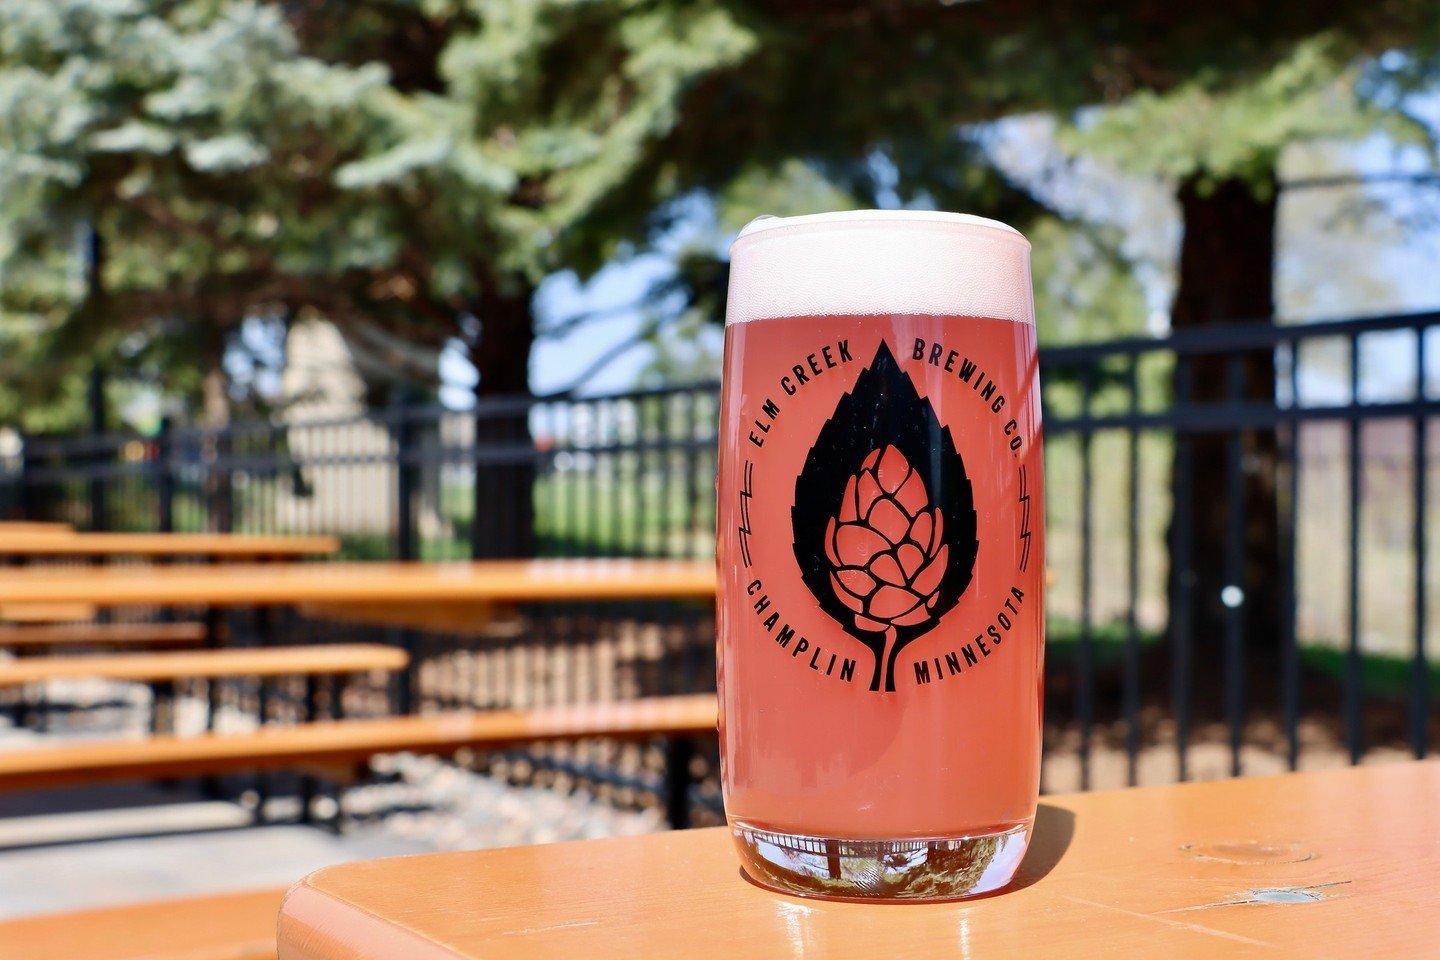 On Wednesday's we wear pink... 😜⁠
⁠
Nothing mean about this one, Captain's Patch Raspberry Lemon Shandy is the perfect crusher if you're looking for a cold brew bursting with fresh fruit flavor! ⁠
⁠
Find it at the brewery and on tap at some of your 